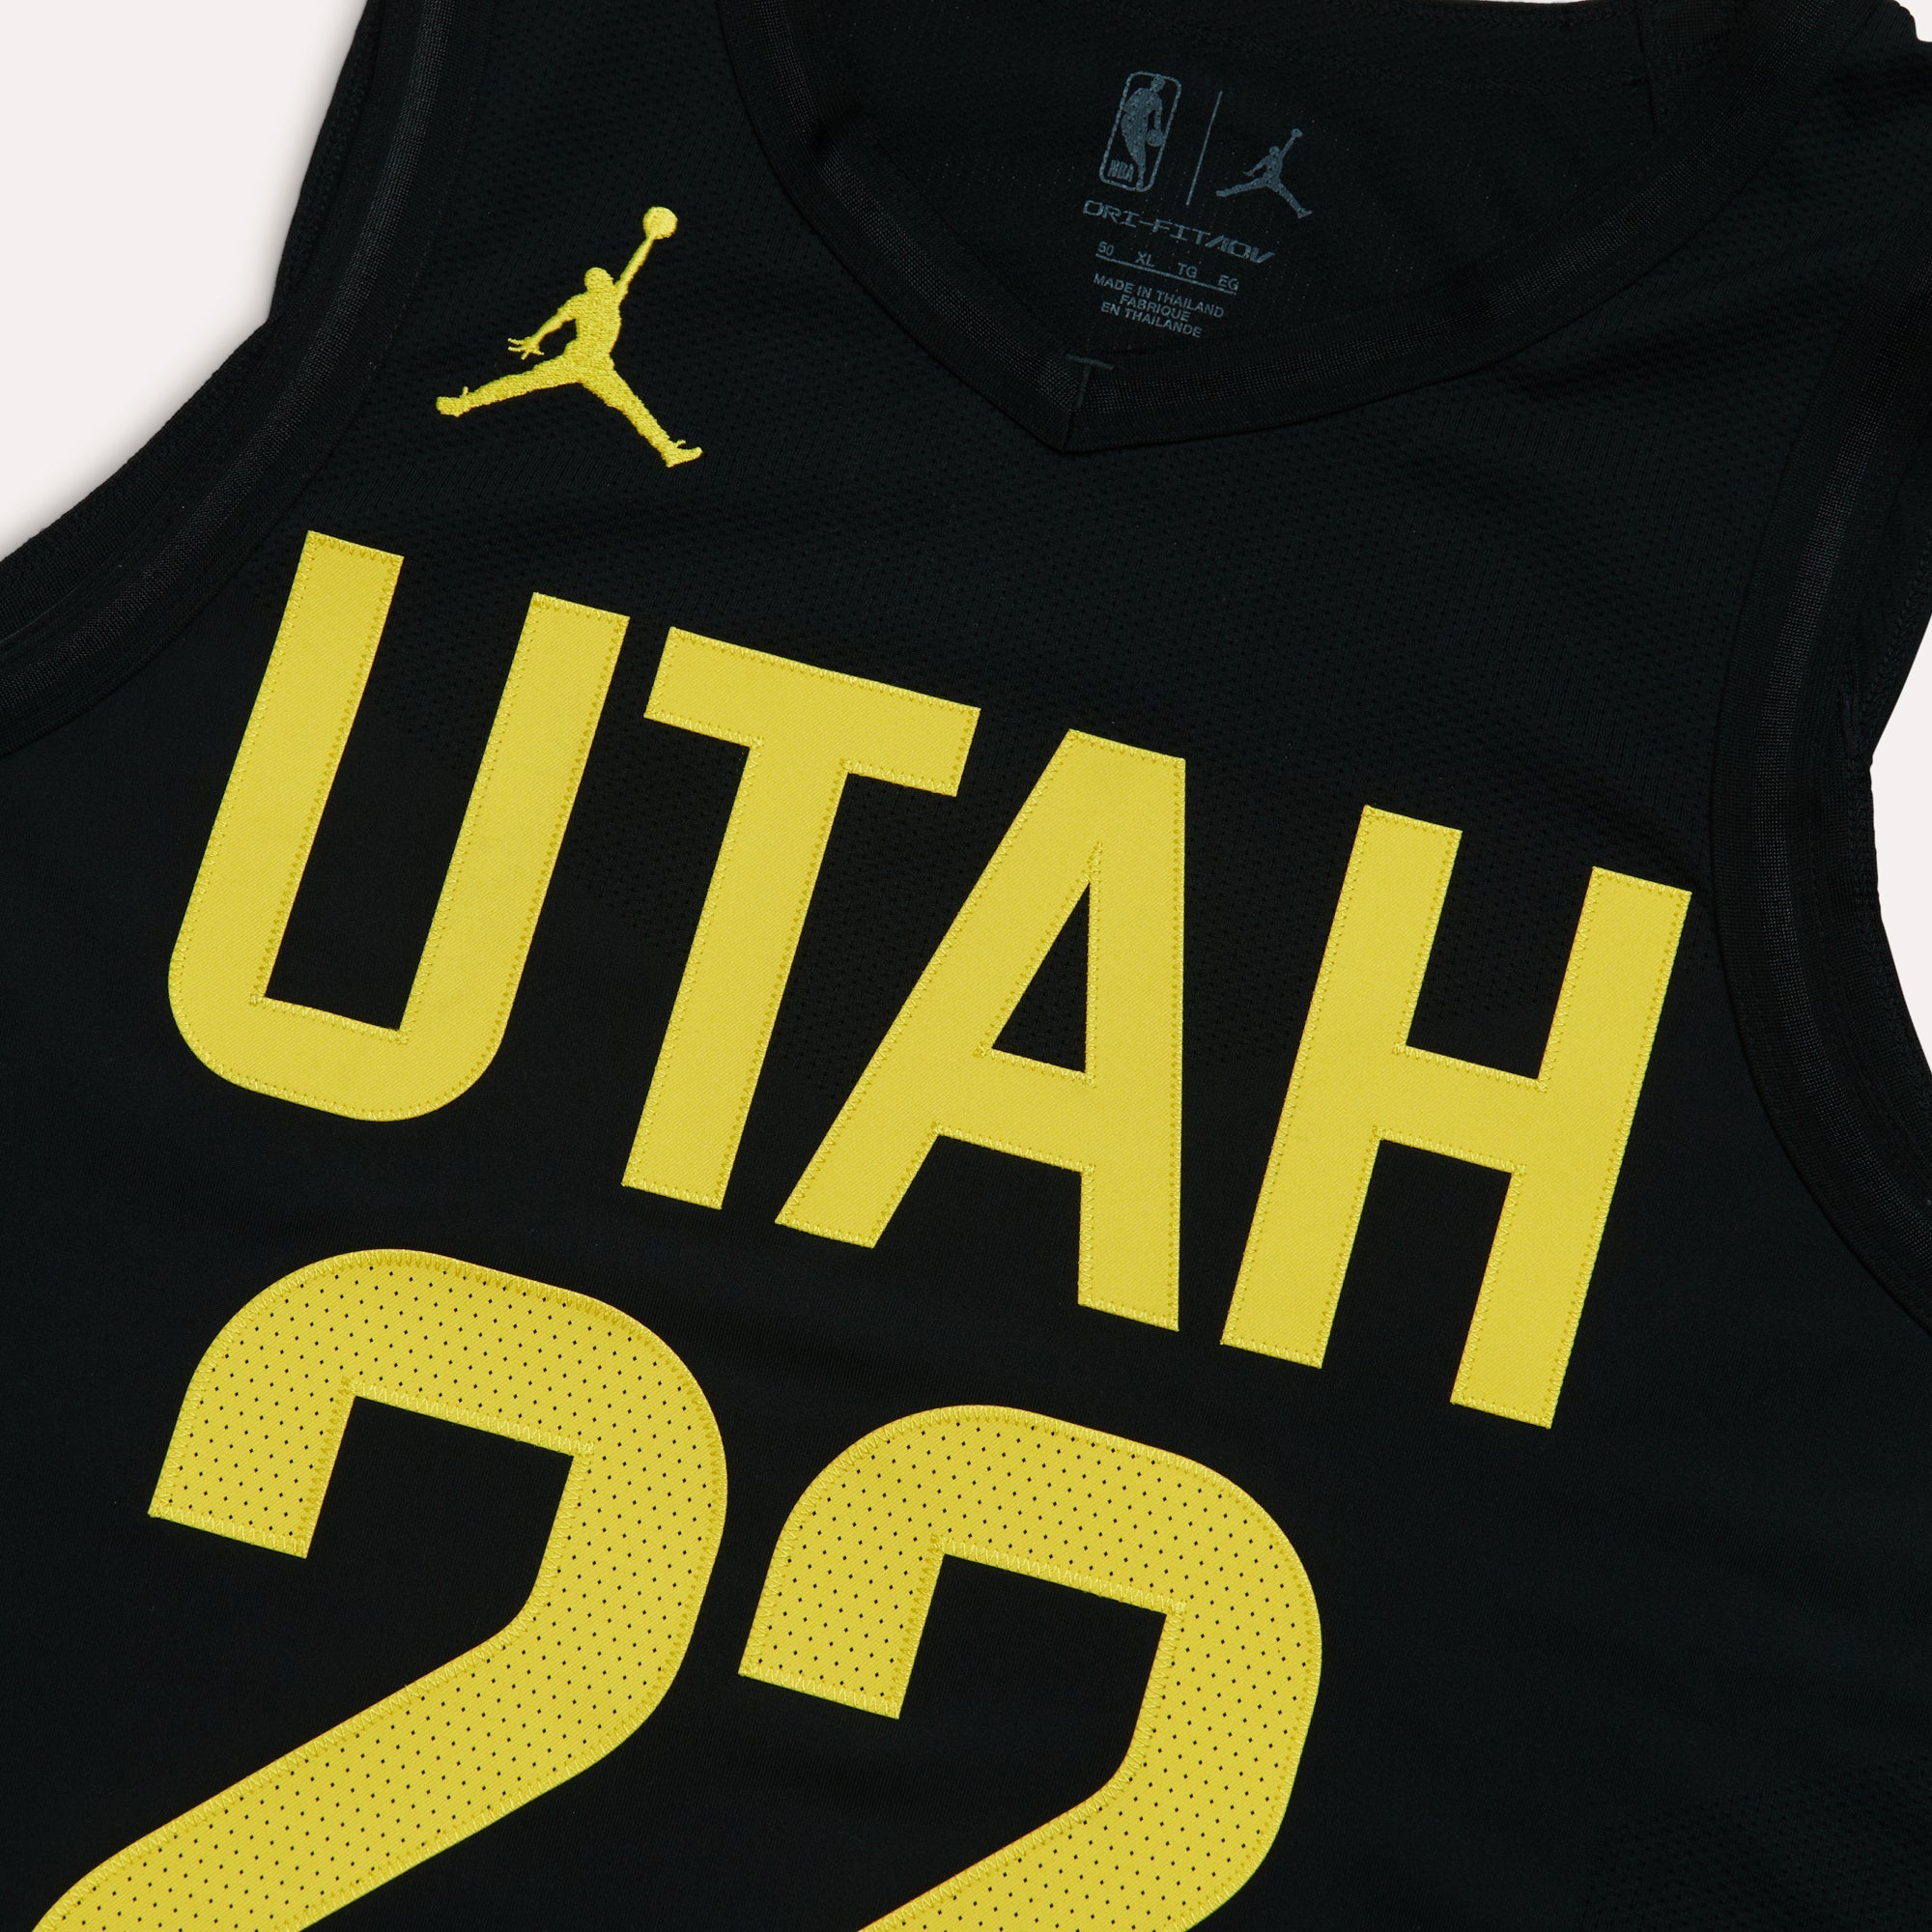 A close up view of the Black Jordan darkmode jersey with yellow accents